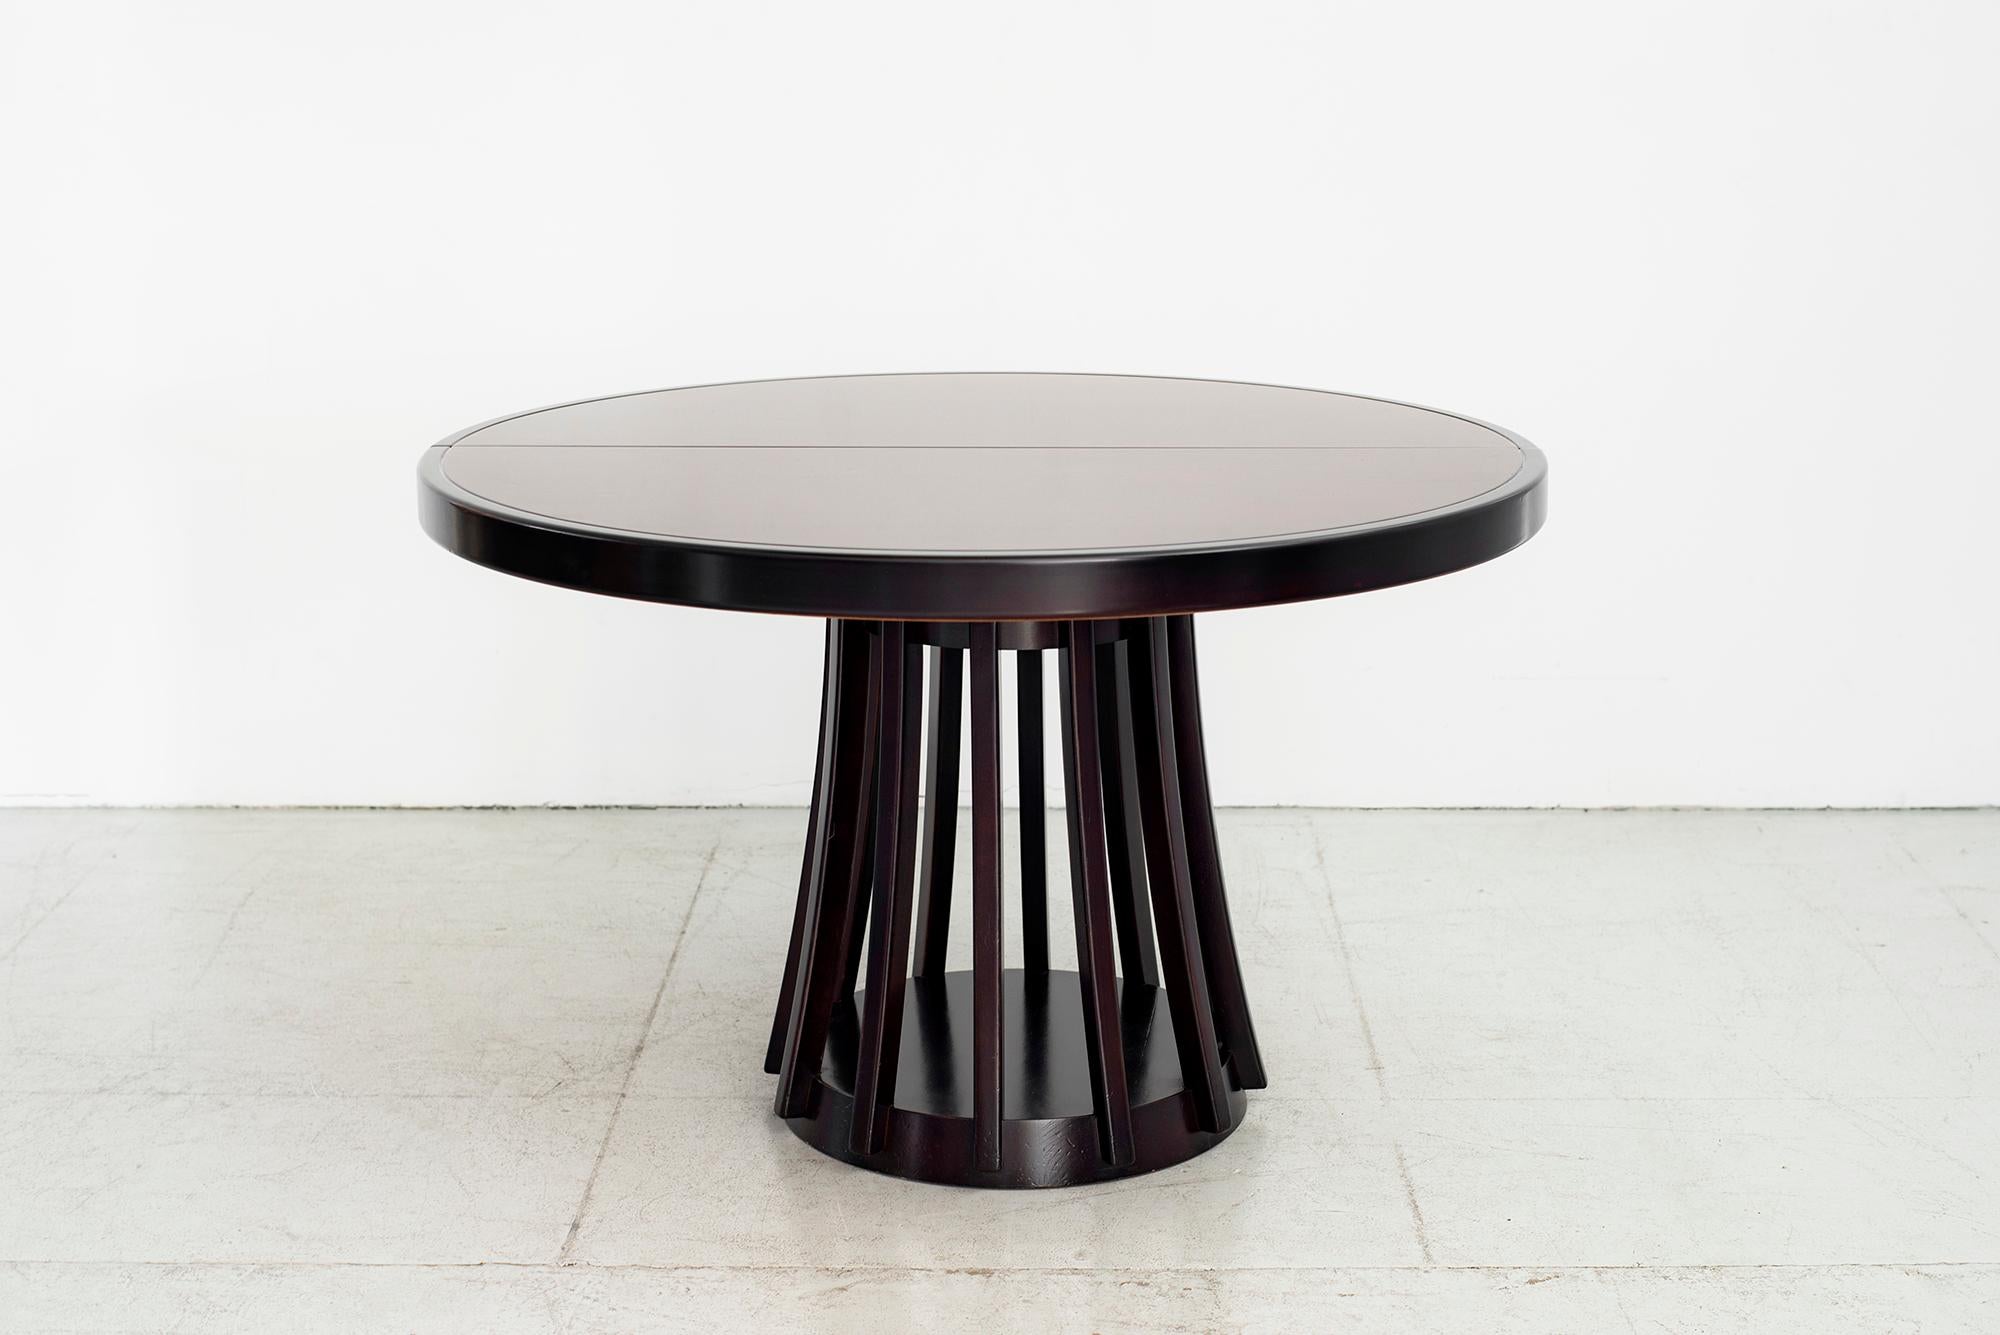 An extendable dining table by Angelo Mangiarotti manufactured by La Sorgente Dei Mobili, 1972.
Rosewood, extendable tabletop, professionally restored.